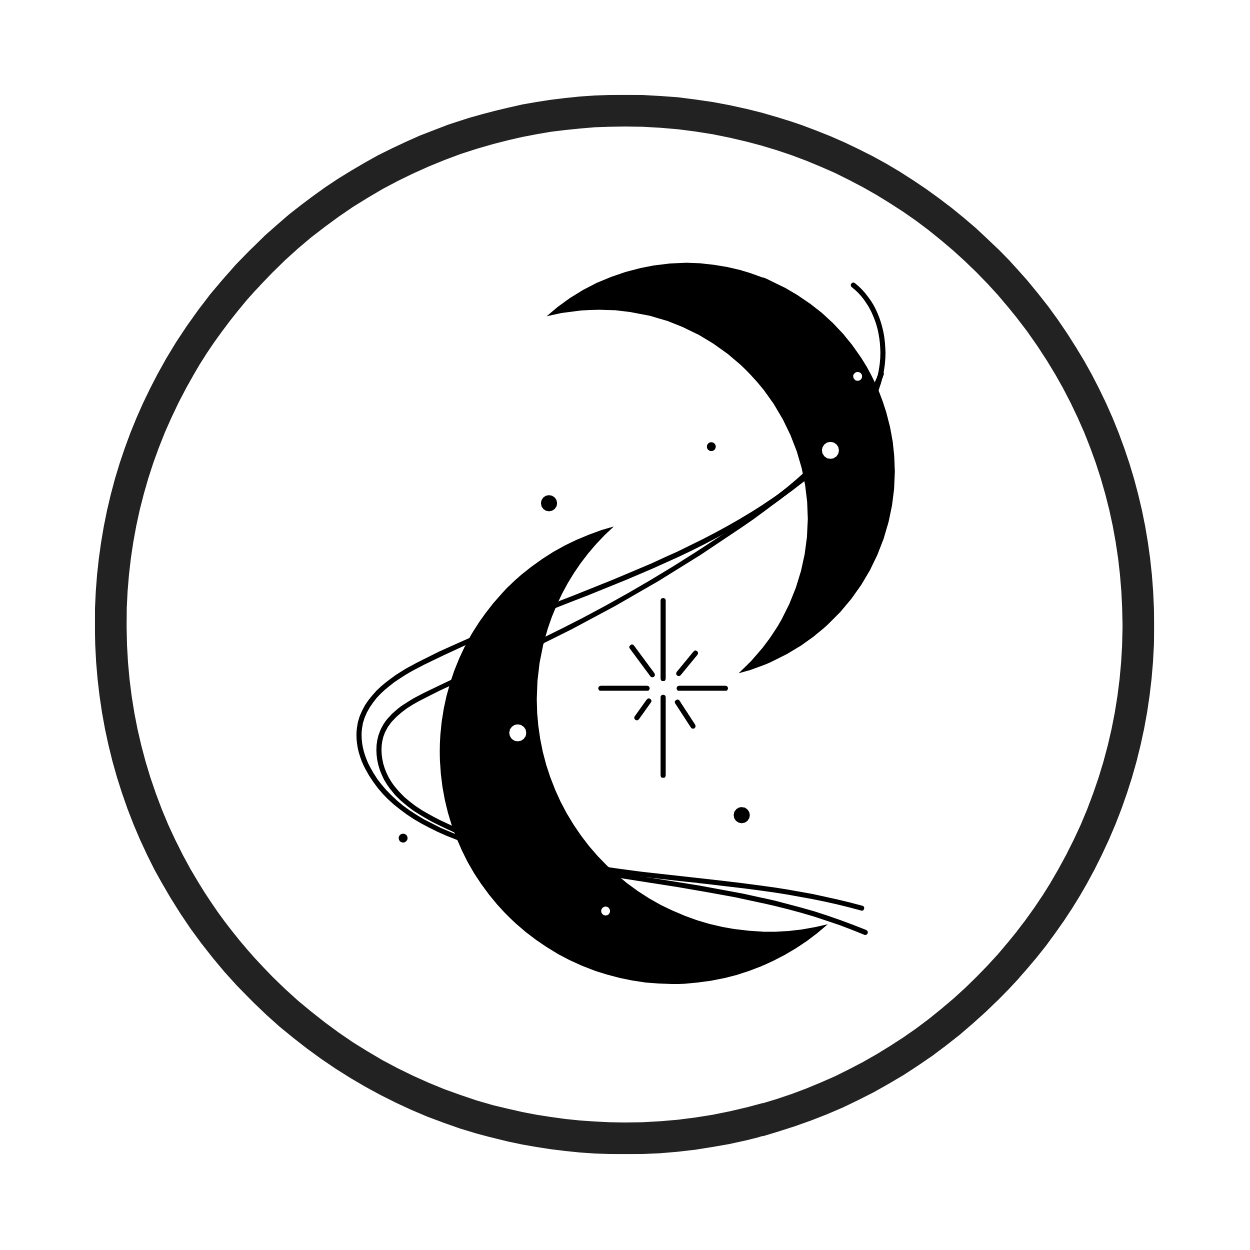 A black and white logo with a crescent moon and a star in a circle.